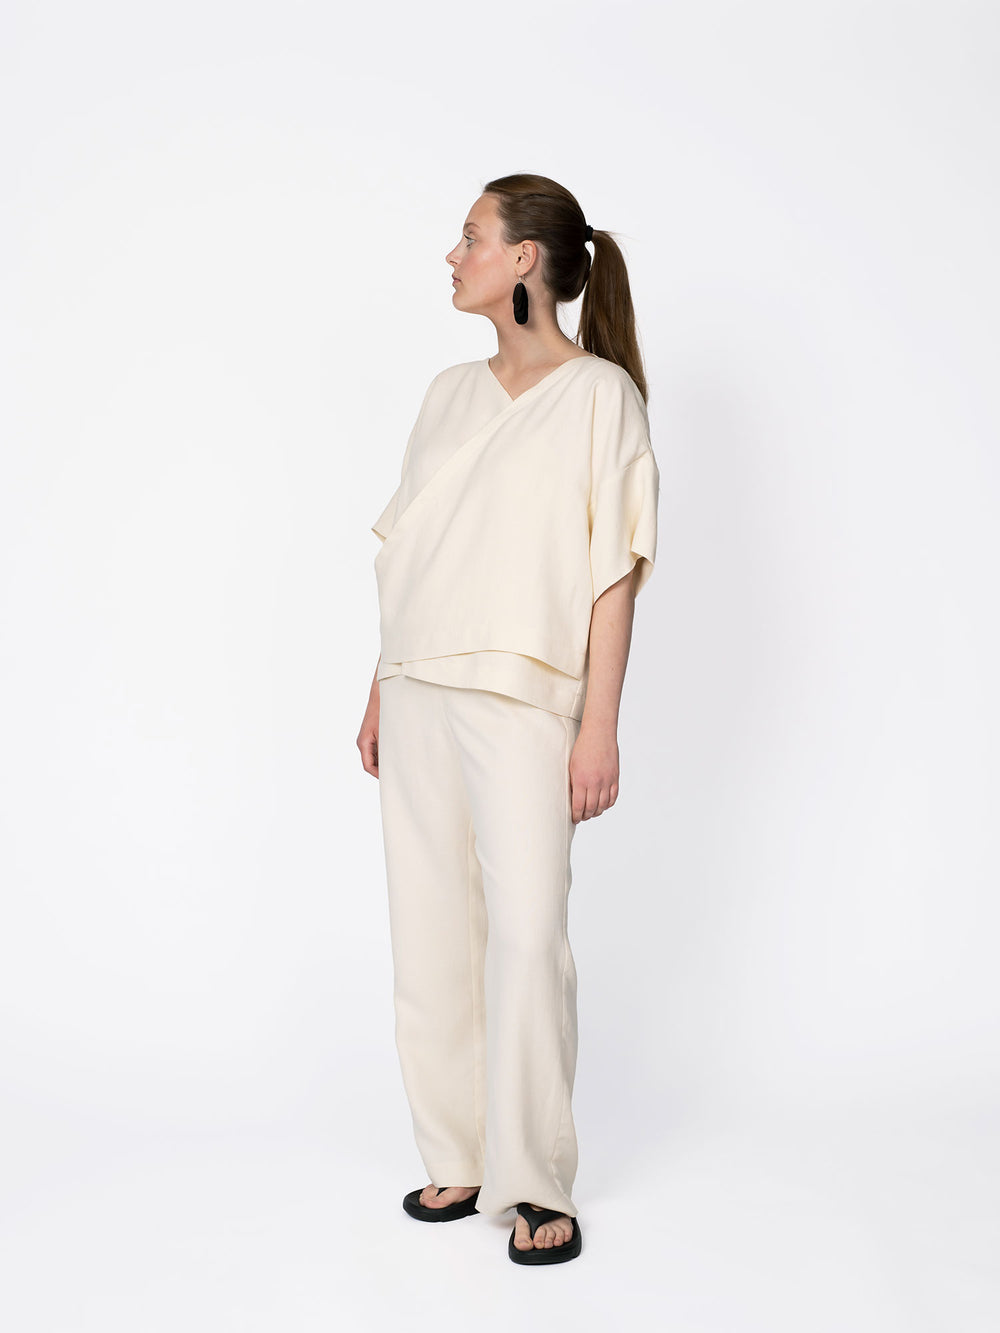 Woman wearing the Wrap Top sewing pattern from The Assembly Line on The Fold Line. A shirt pattern made in cotton, linen, viscose, wool or blends, and lightweight twill fabrics, featuring a relaxed boxy fit, two uneven overlapping shaped fronts, asymmetri